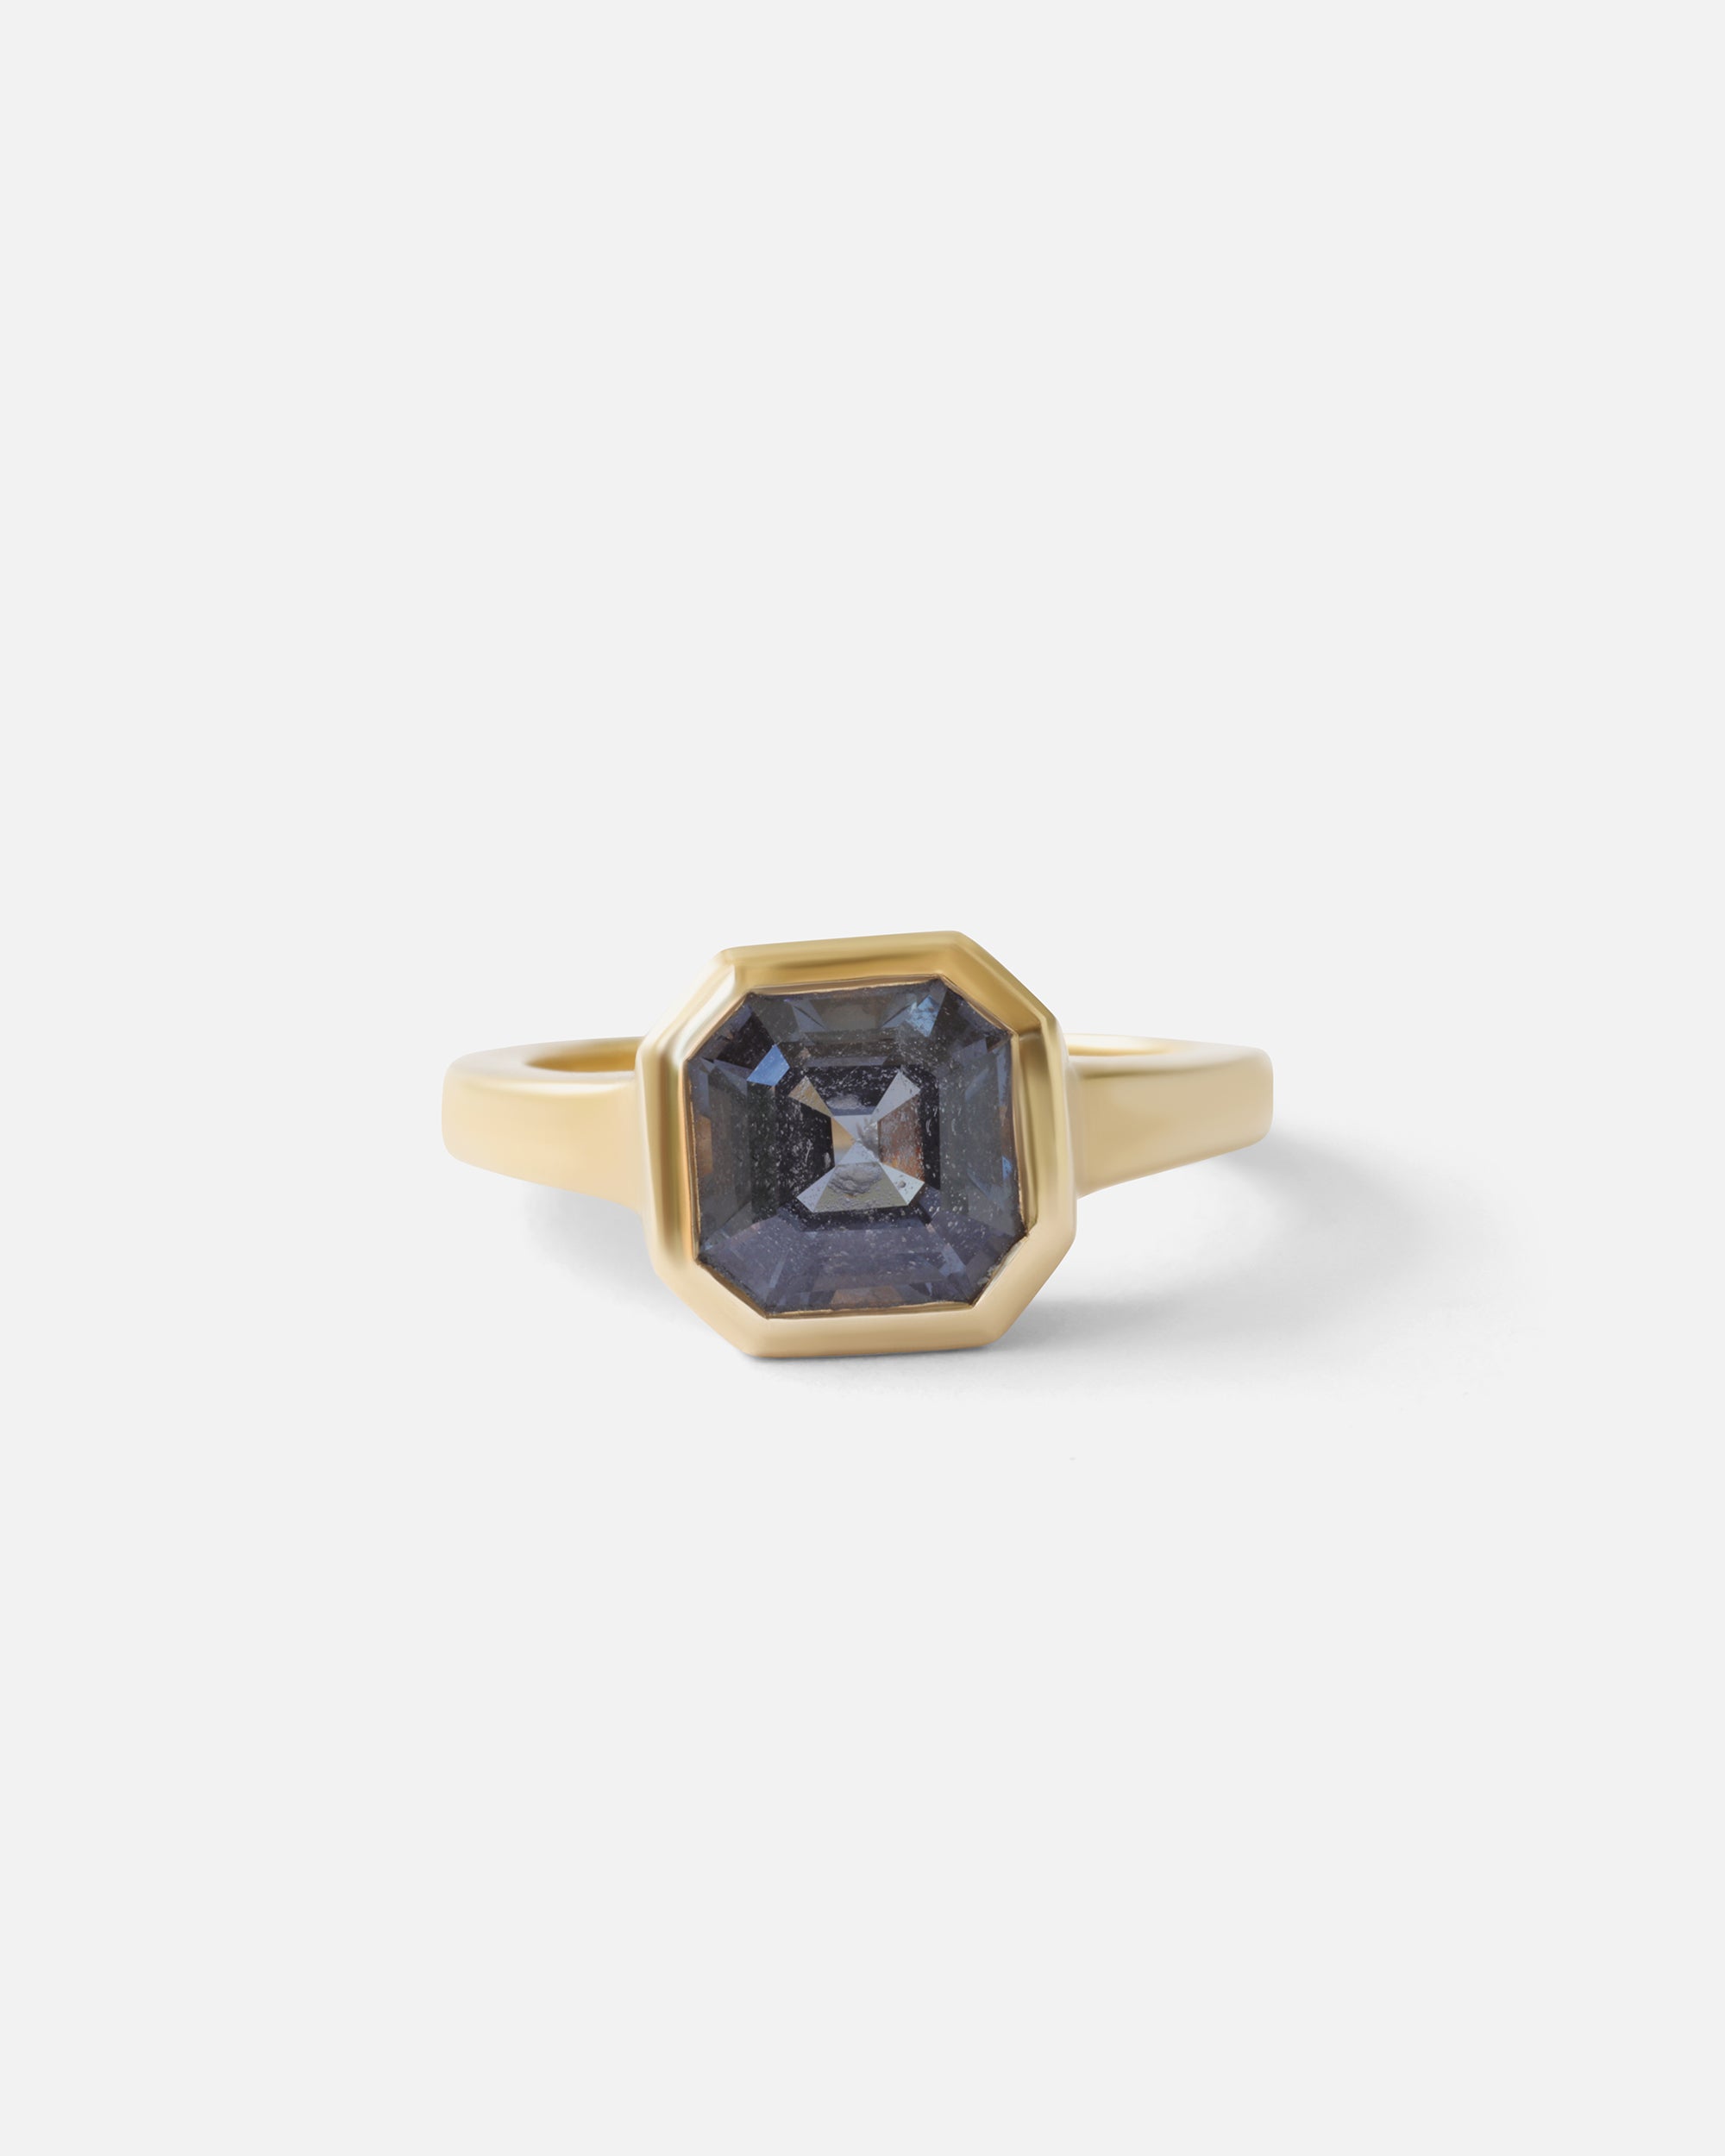 Grey Spinel Ring By Bree Altman in Engagement Rings Category